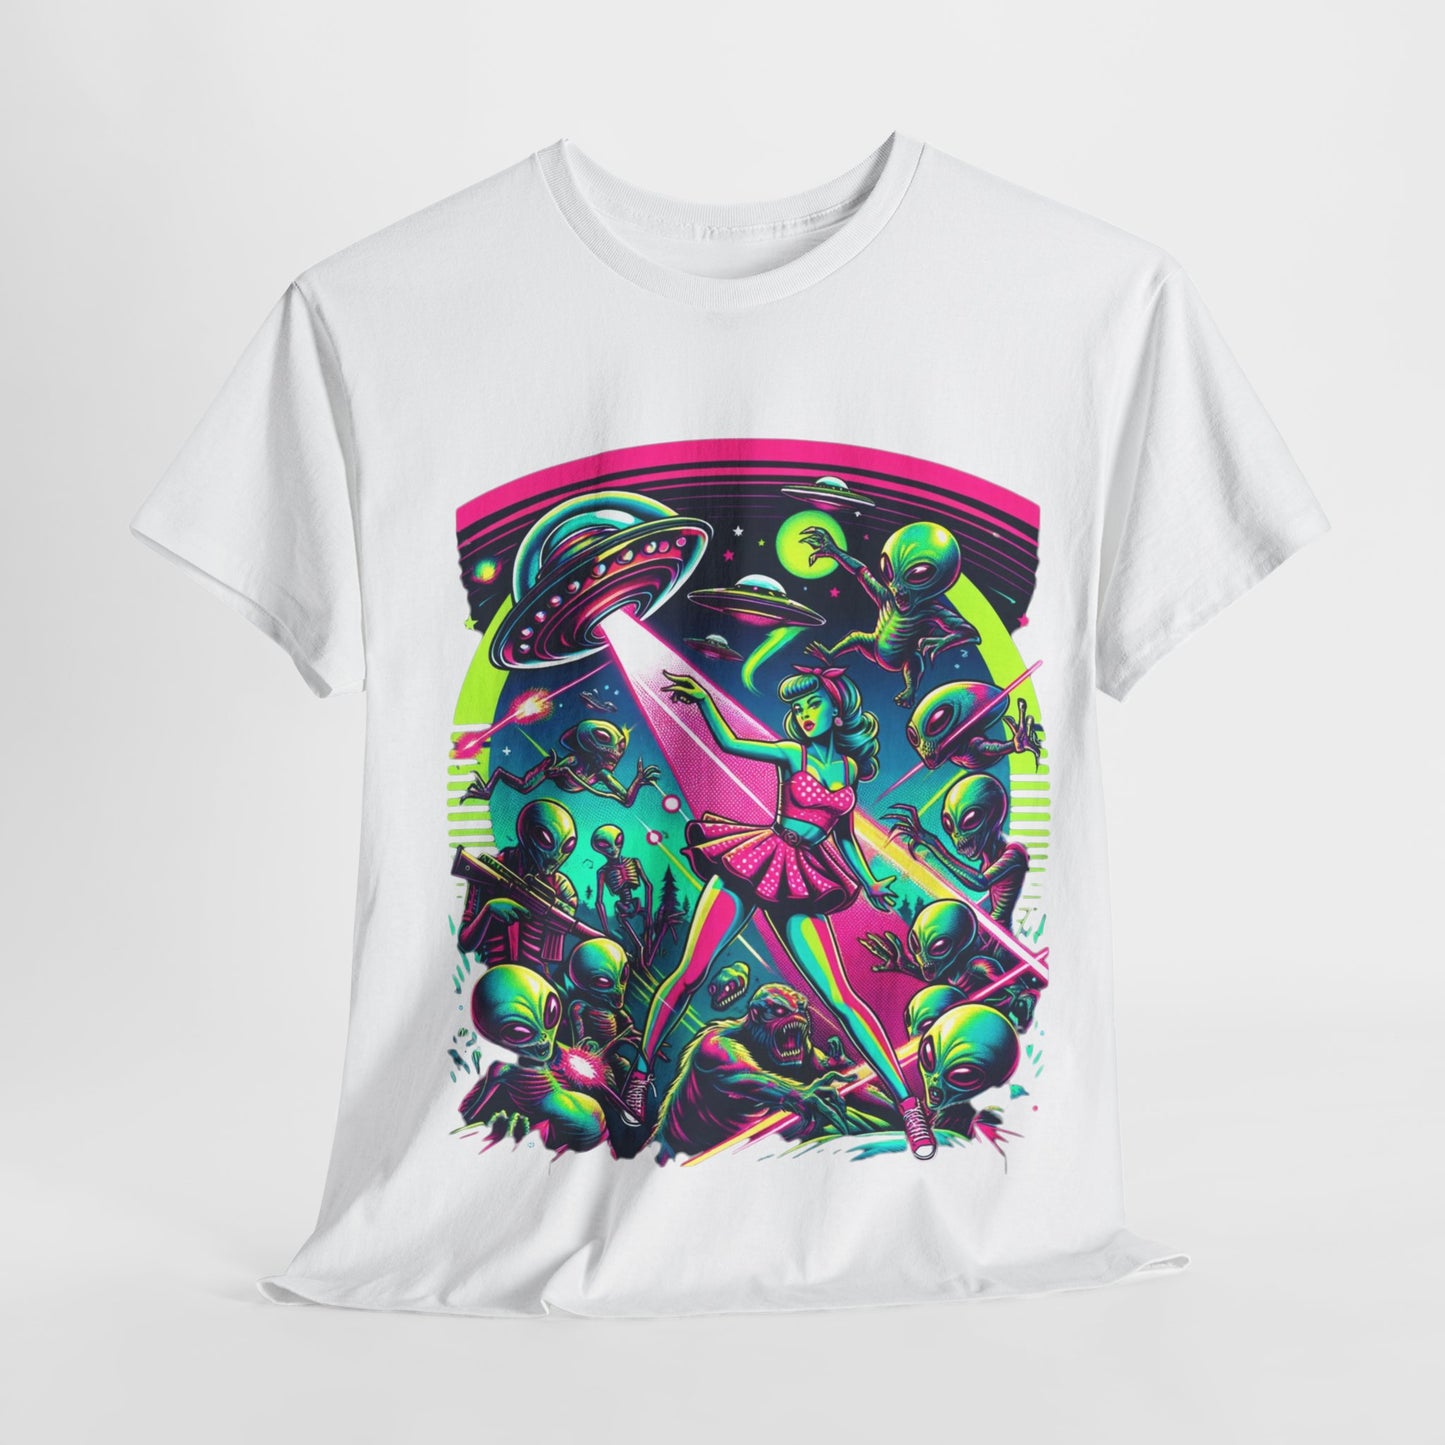 🚀👽 Limited Edition Alien Invasion Tee: Iconic Pin-Up Style Sci-Fi Fashion – Grab Yours & Stand Out!